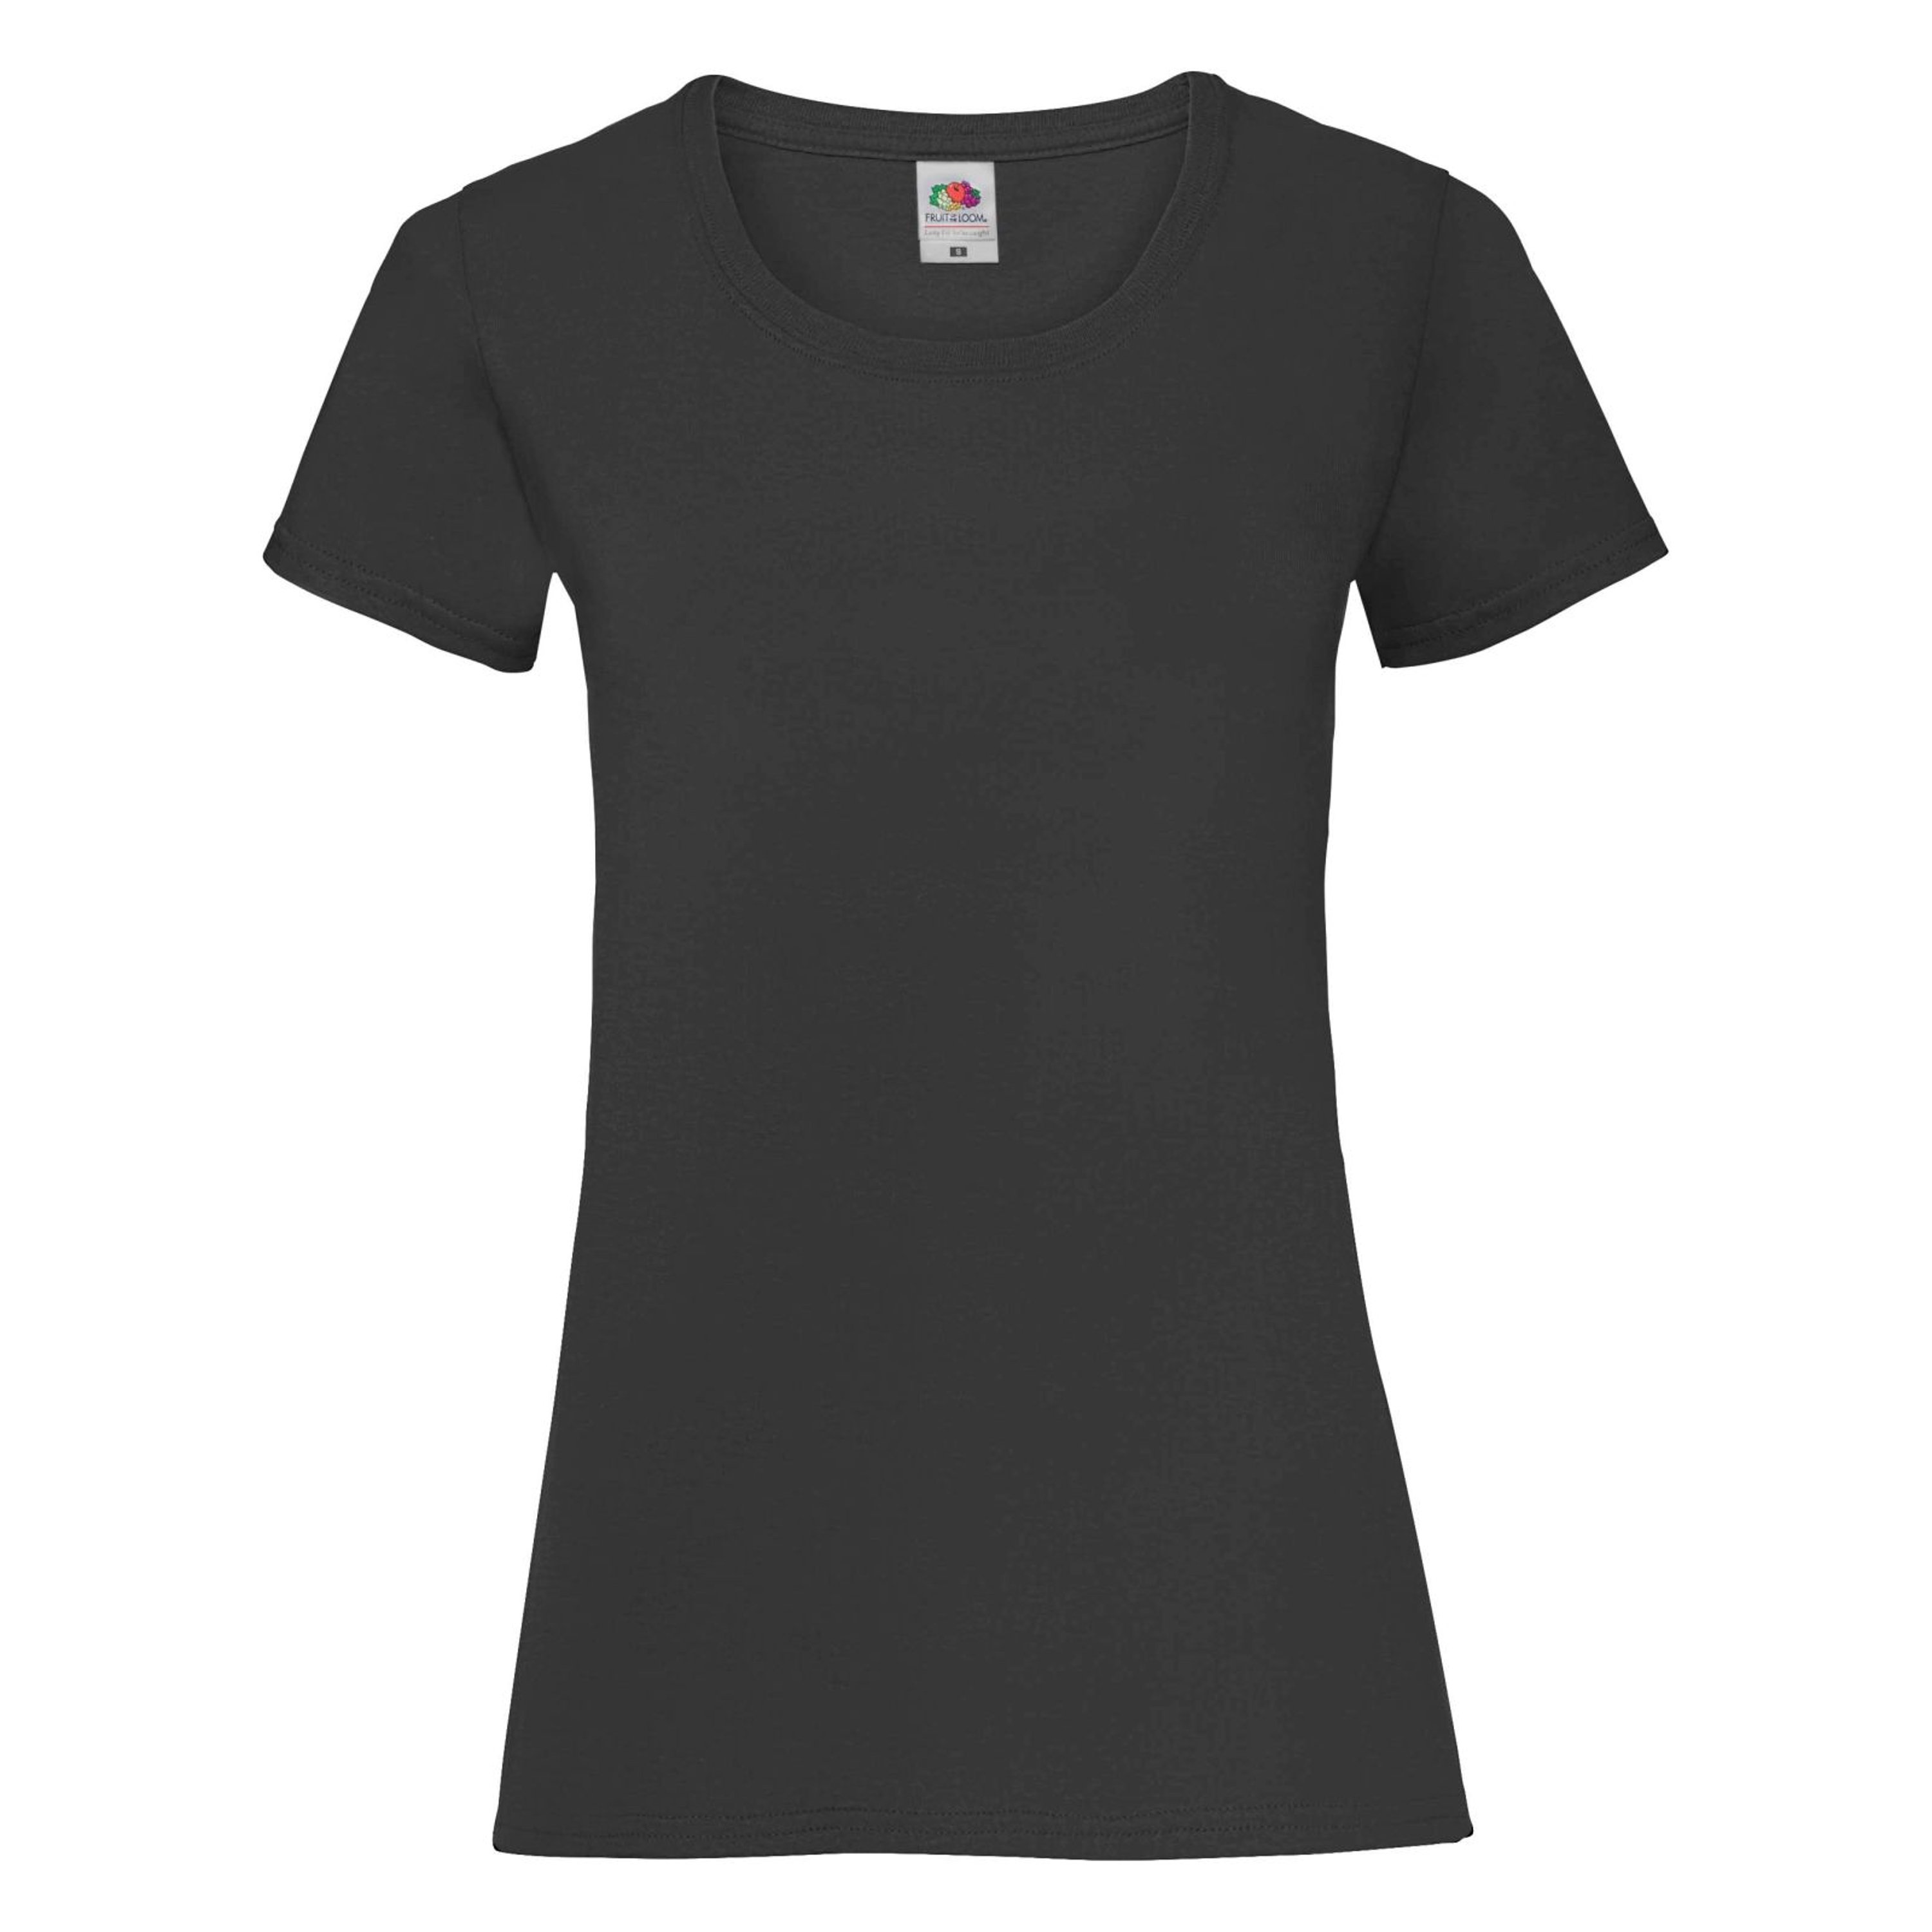 FRUIT OF THE LOOM FRUIT OF THE LOOM FRUIT OF THE LOOM LADIES/WOMENS LADY-FIT VALUEWEIGHT SHORT SLEEVE T-SHIRT (PACK (B